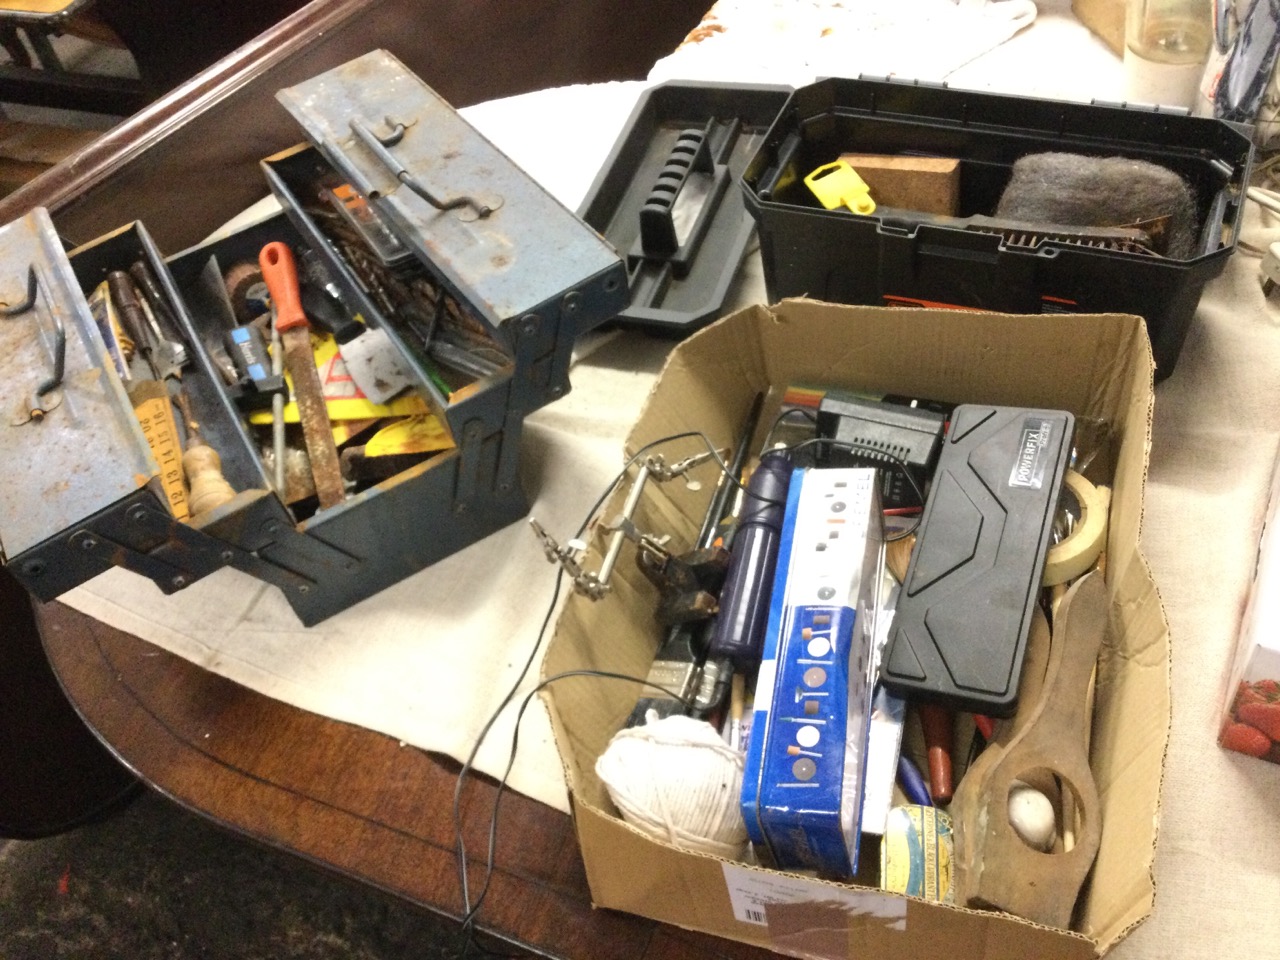 A concertina type toolbox full of miscellaneous tools - screwdrivers, tape, alun keys, pliers, drill - Image 3 of 3